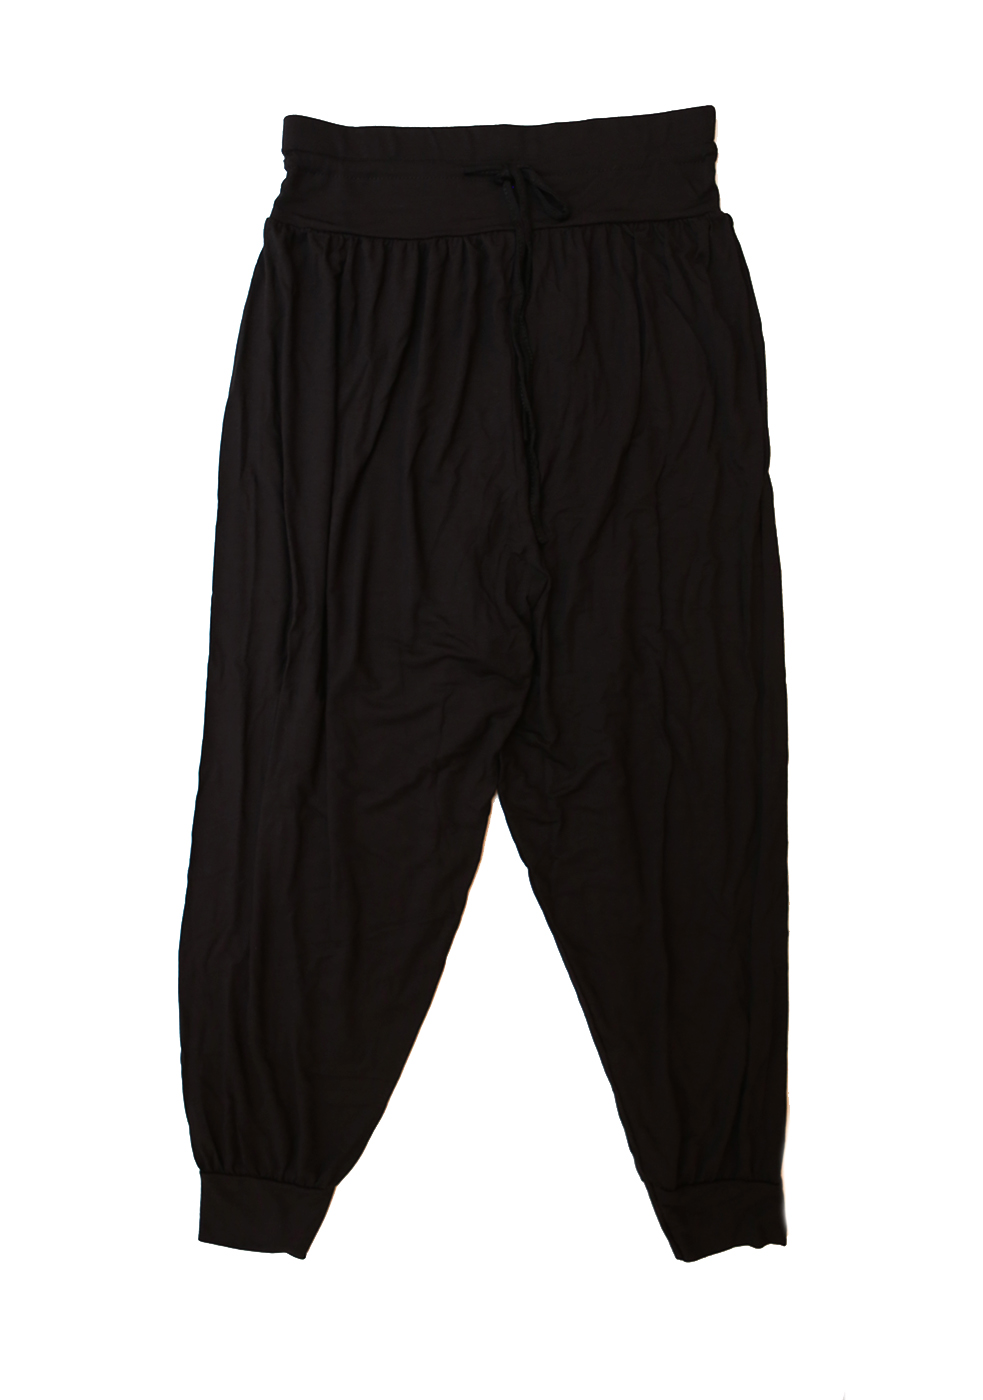 What should one know about black harem pants? – StyleSkier.com